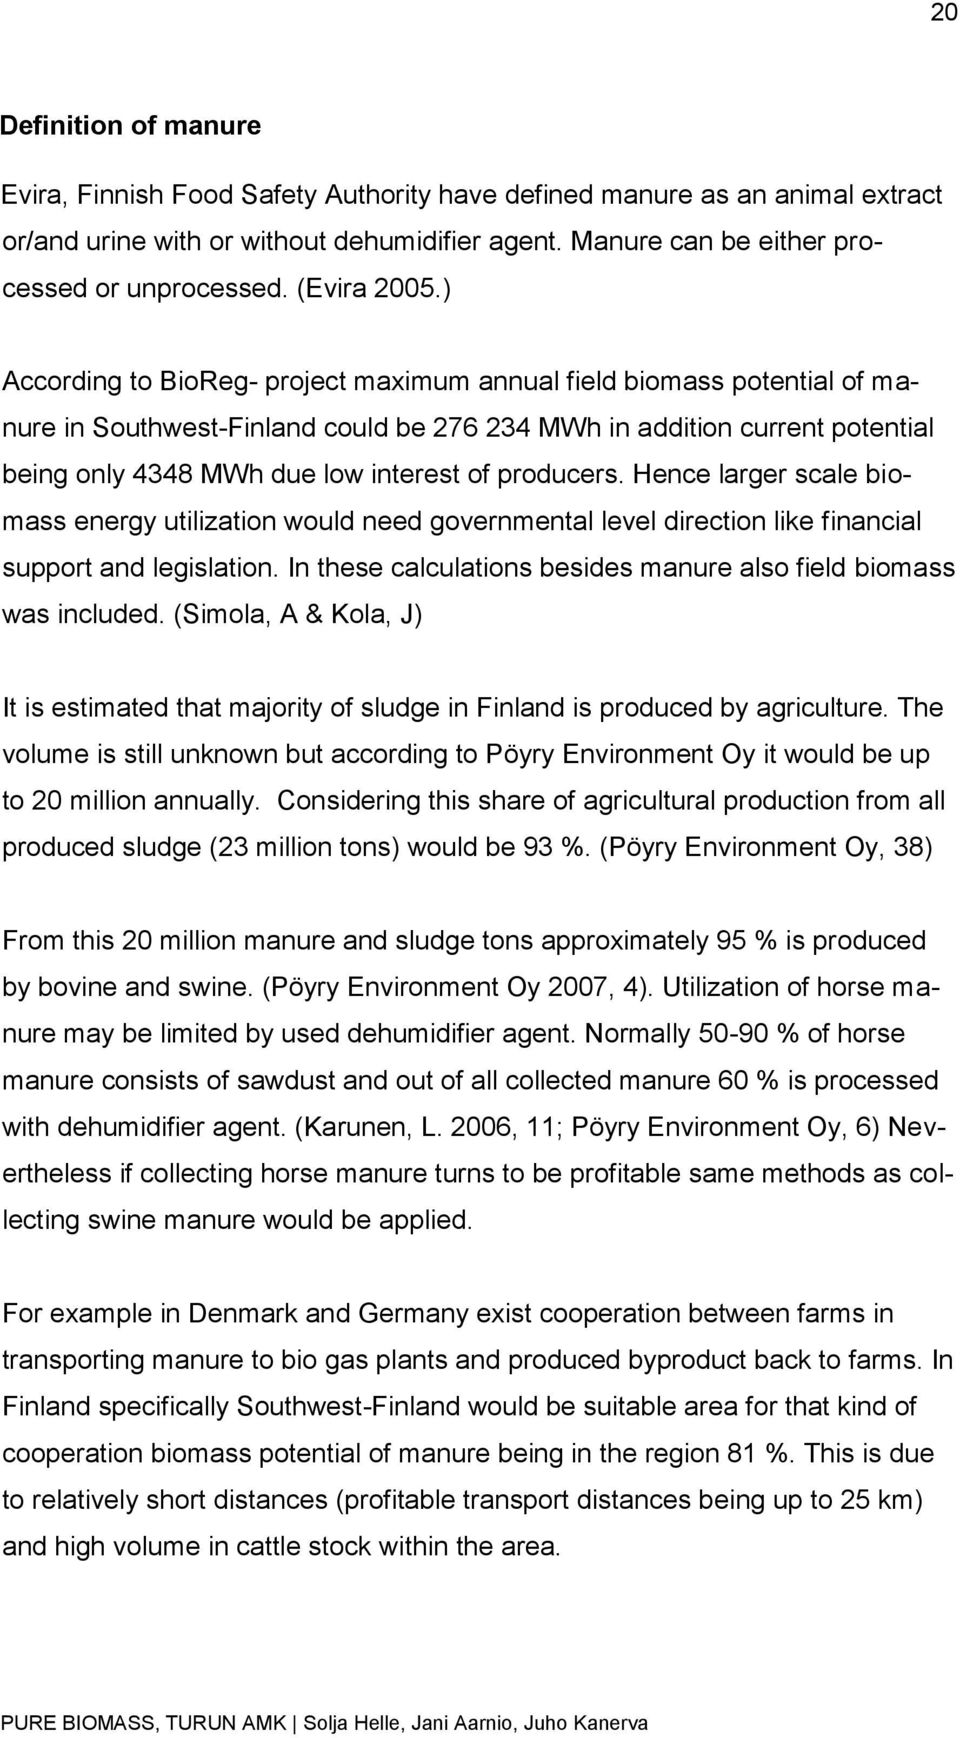 ) According to BioReg- project maximum annual field biomass potential of manure in Southwest-Finland could be 276 234 MWh in addition current potential being only 4348 MWh due low interest of